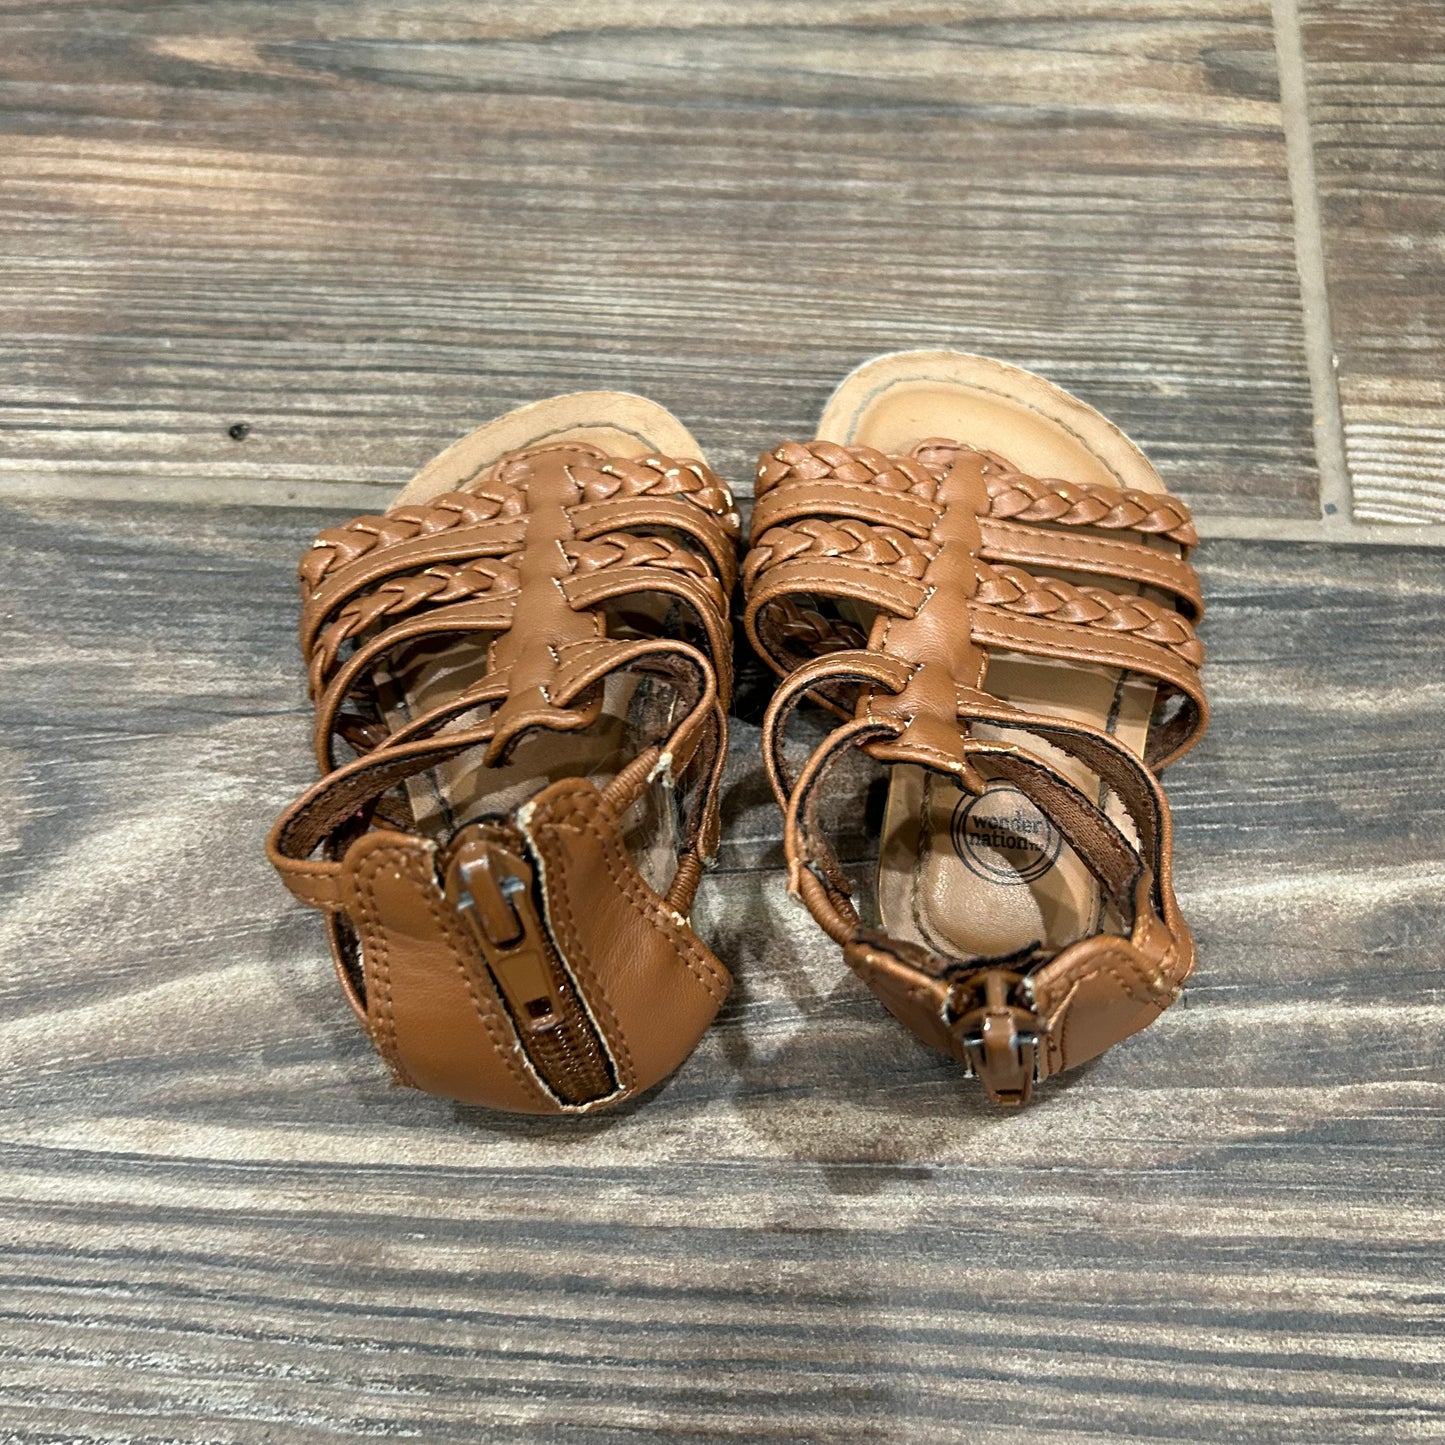 Size 3 (Infant) Wonder Nation Brown Sandals - Good Used Condition